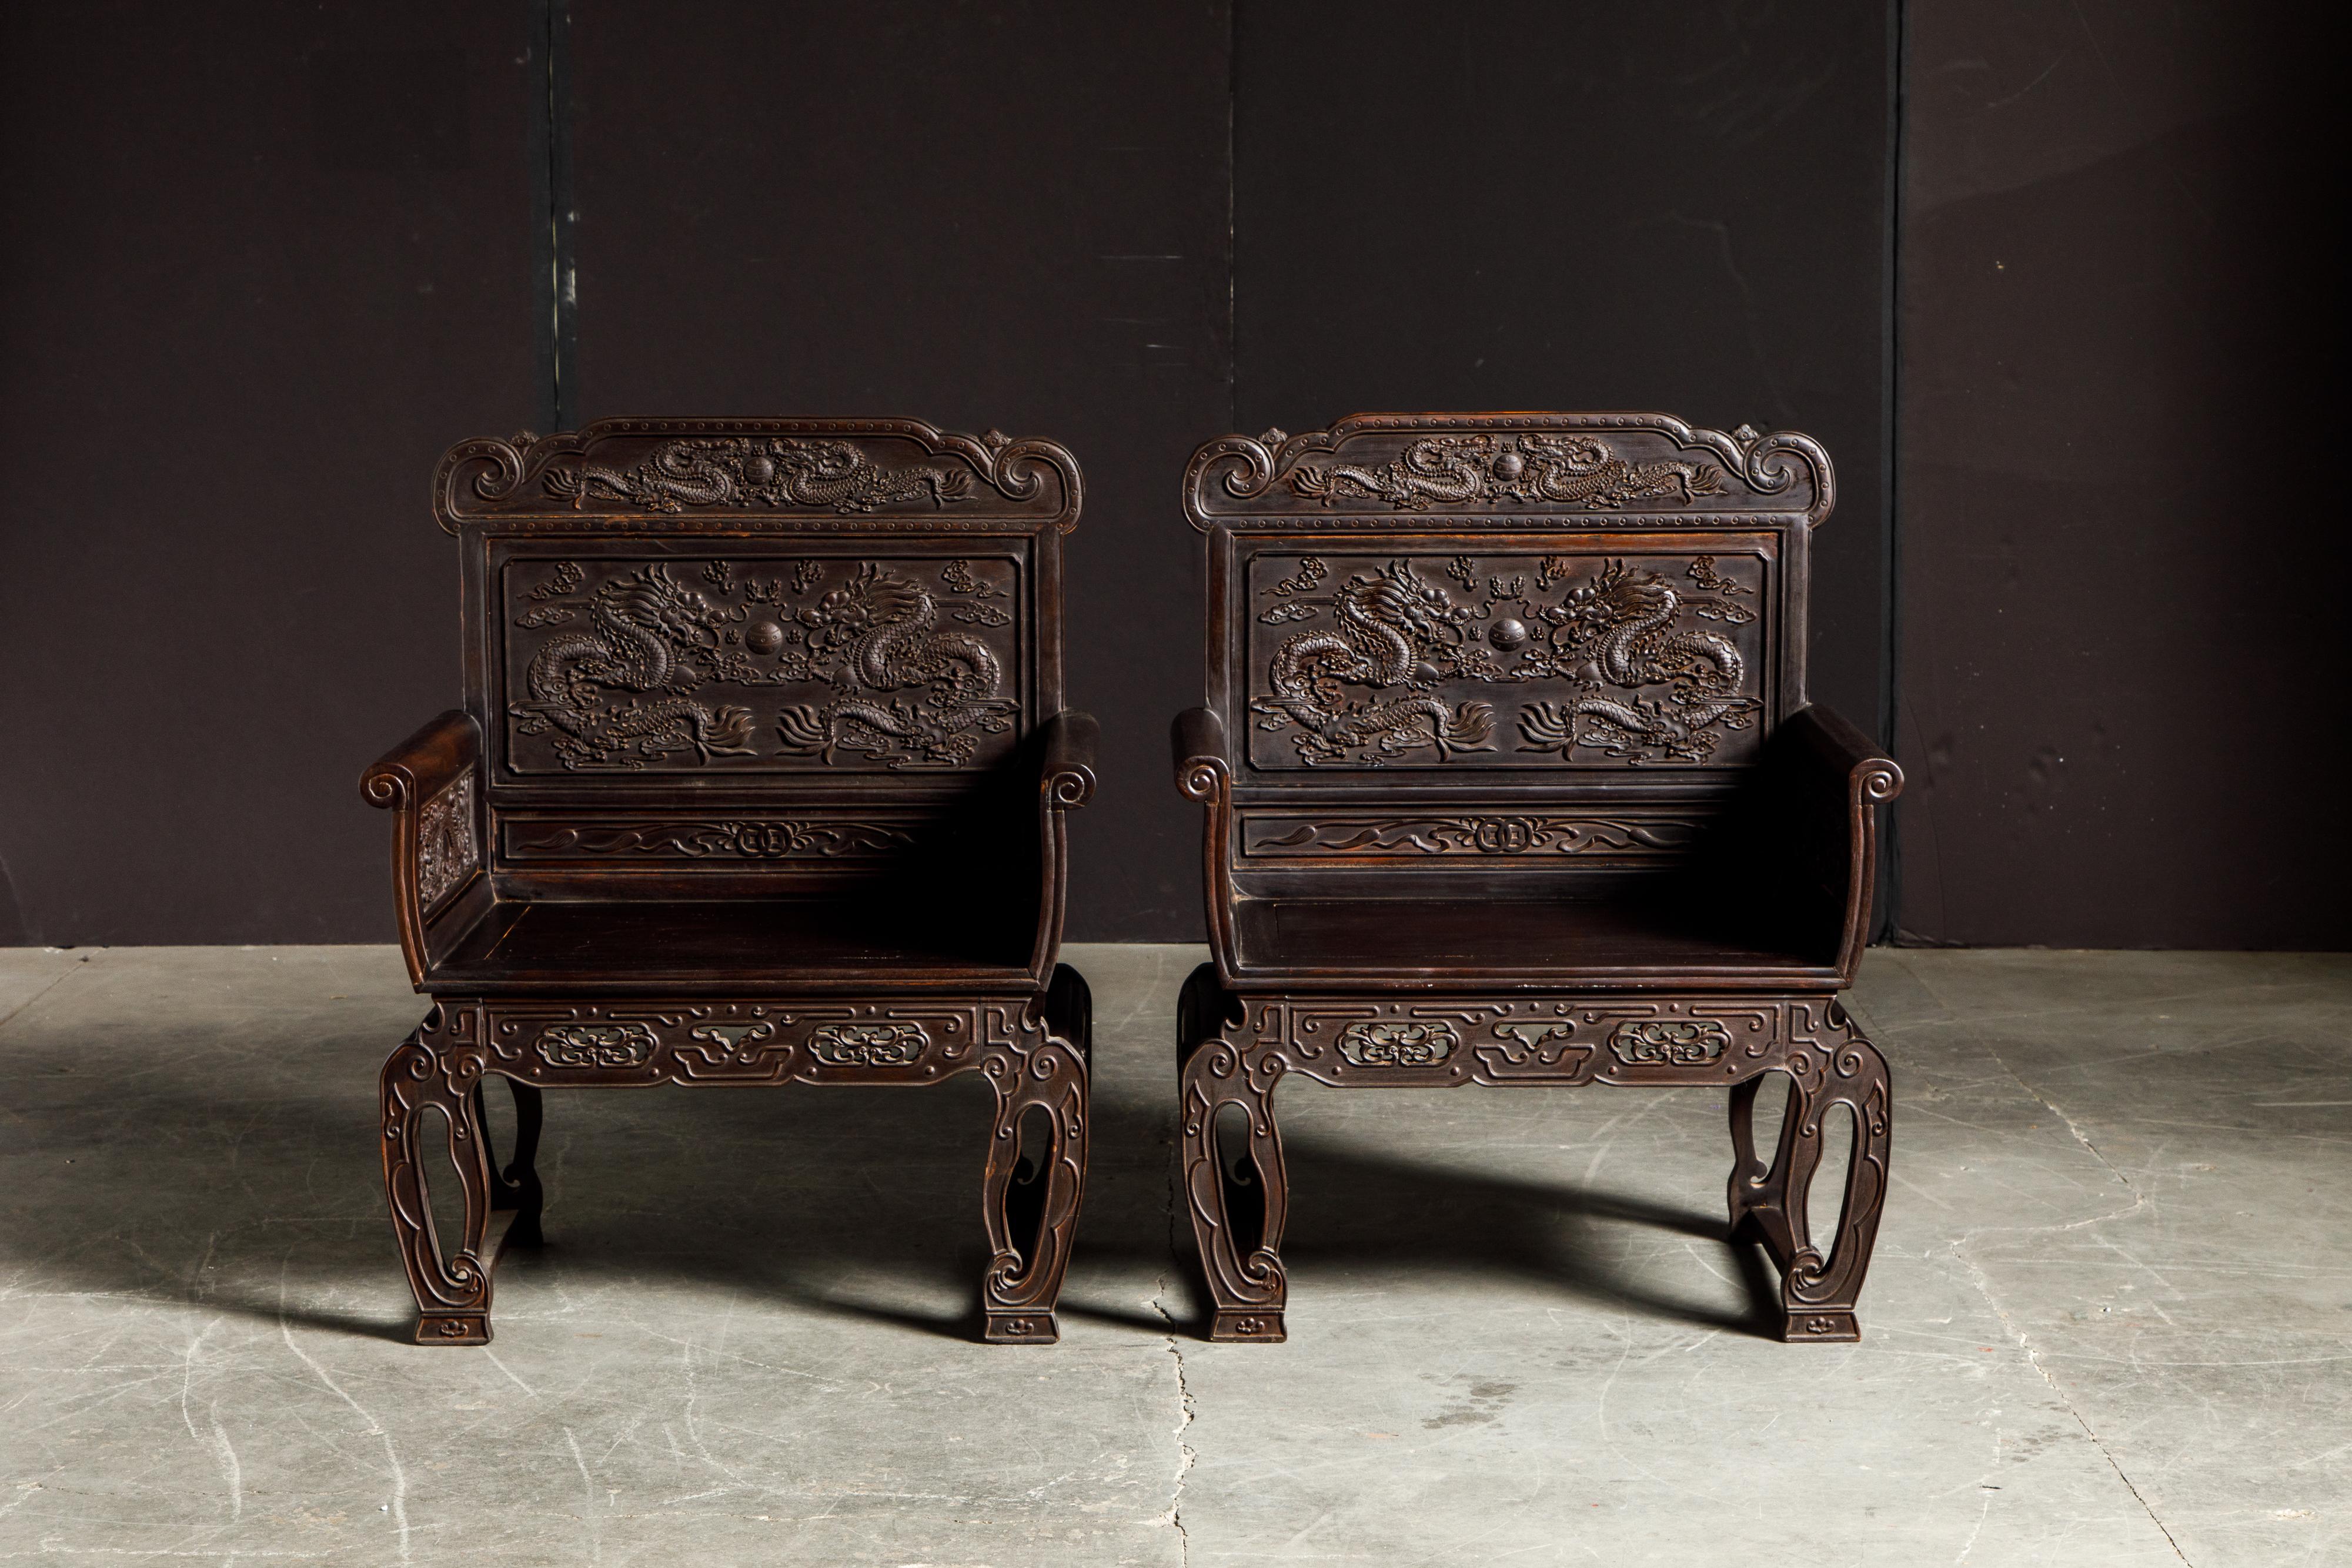 Pair of Carved Chinese Zitan Throne Chairs with Dragon Motifs 11